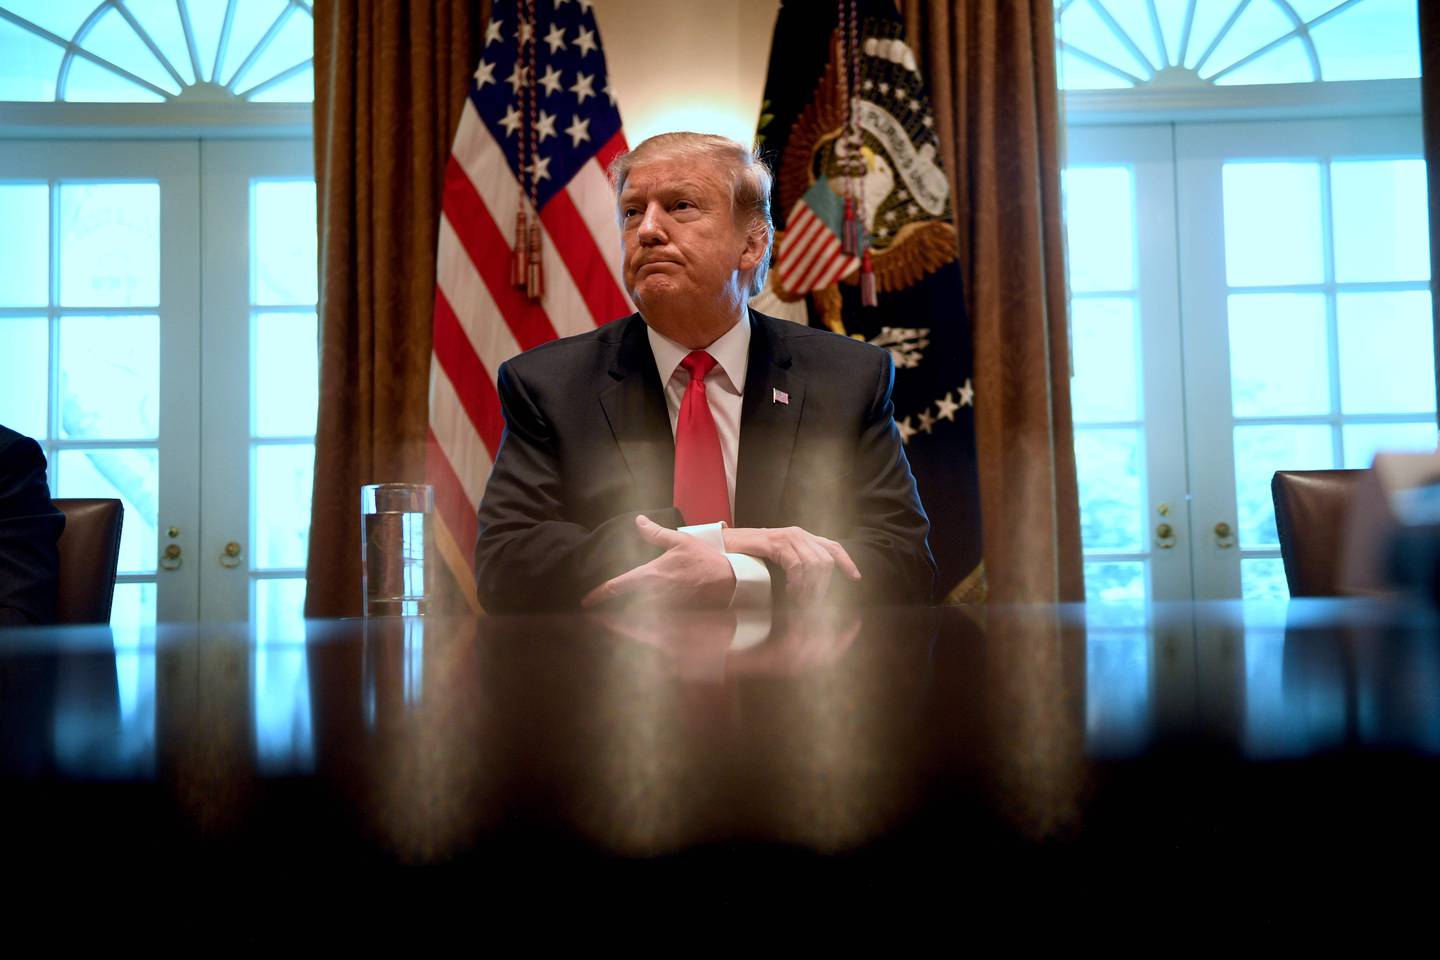 (FILES) In this file photo taken on January 31, 2019 US President Donald Trump meets to discuss fighting human trafficking on the southern border in Washington, DC. - President Donald Trump promises a shift to sunny optimism in the State of the Union speech but with his congressional Democratic nemesis seated right behind him, will he be able to resist throwing his usual thunderbolts? The White House is flagging an "optimistic," "unifying," even "visionary" speech to mark this presidency's midway point. In an excerpt released Friday, Trump predicts Republicans and Democrats can "break decades of political stalemate." But the mood in Washington is as hostile as it has been for years following the confrontation between Trump and the Democratic-led House of Representatives over his demand for funding for a US-Mexico border wall. (Photo by Jim WATSON / AFP)